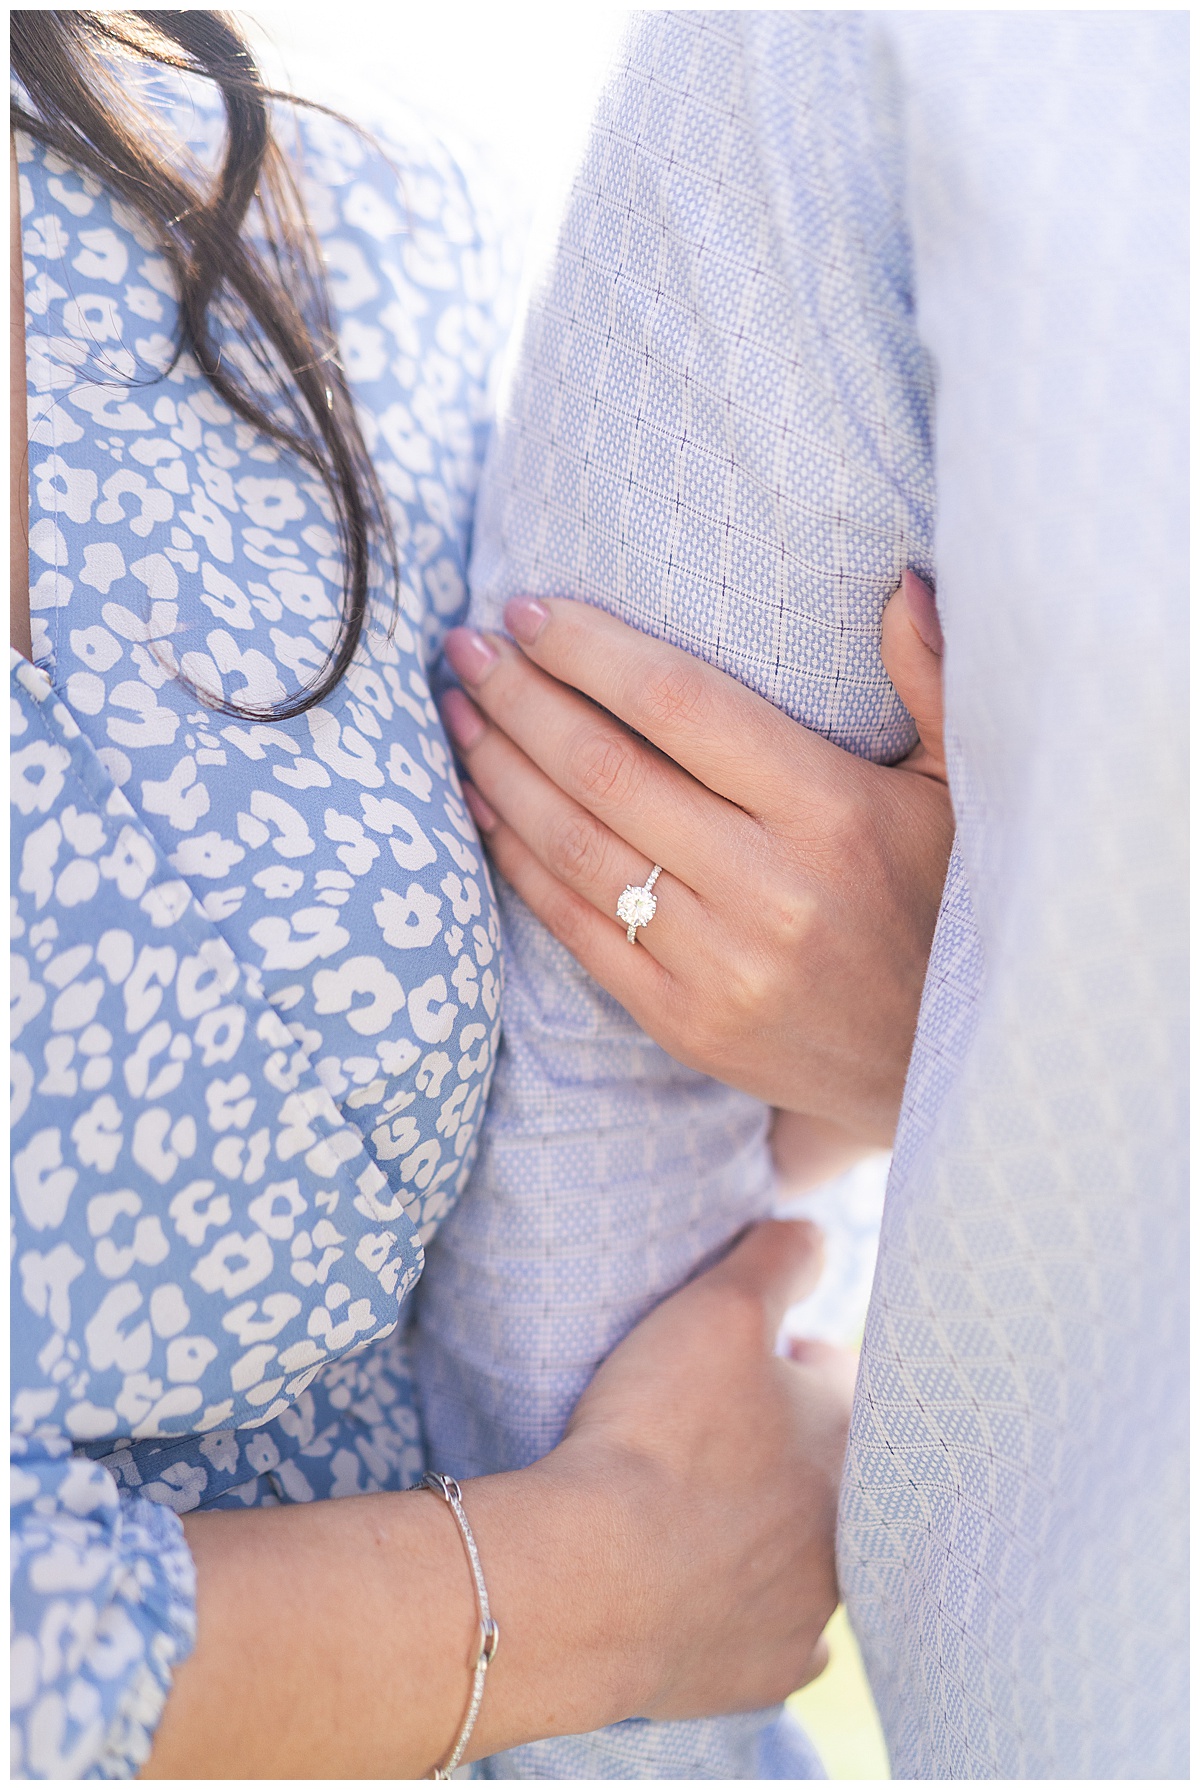 Stunning engagement ring is shining bright in one of my Favorite Engagement Photo Poses 